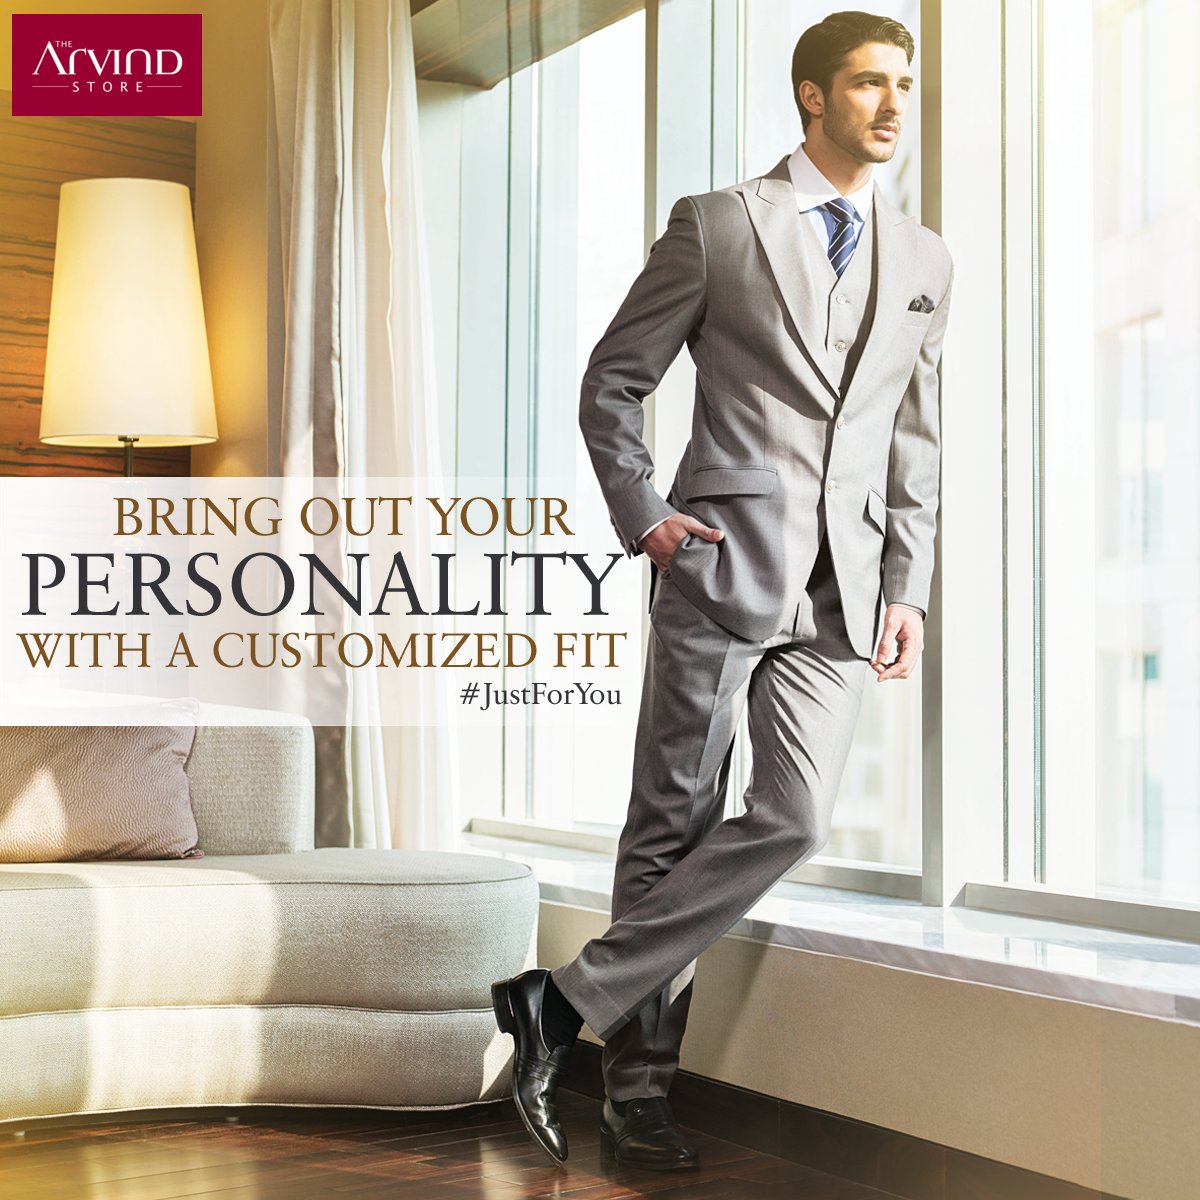 Clothes don’t make the man but a well-fitted pair can make you look great. #JustForYou https://t.co/ZwiEY2Bnox